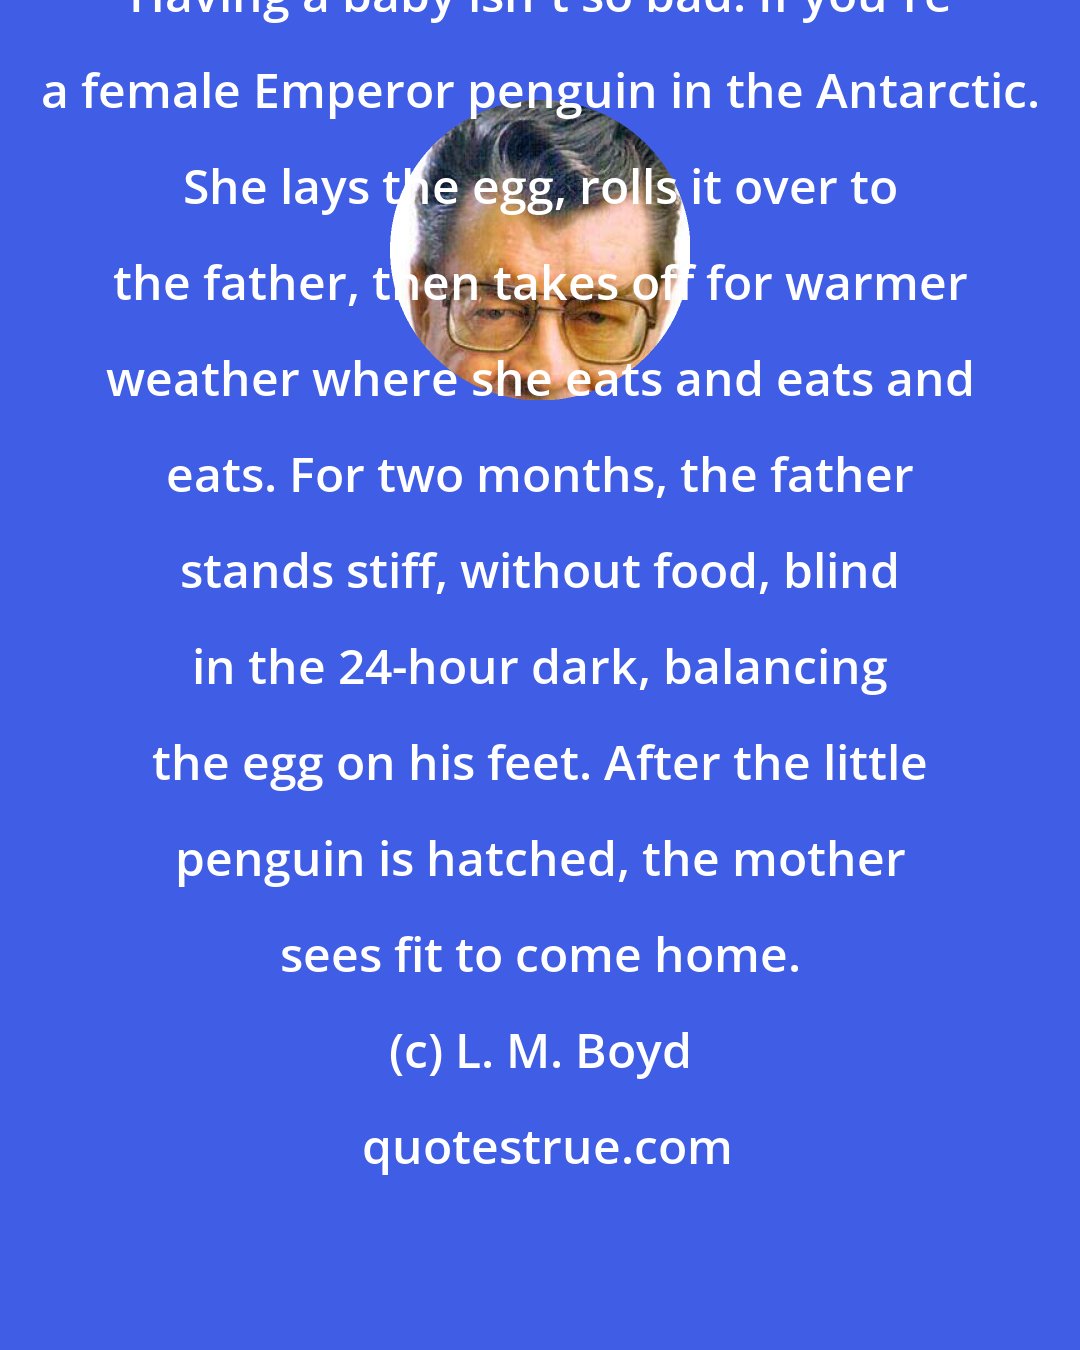 L. M. Boyd: Having a baby isn't so bad. If you're a female Emperor penguin in the Antarctic. She lays the egg, rolls it over to the father, then takes off for warmer weather where she eats and eats and eats. For two months, the father stands stiff, without food, blind in the 24-hour dark, balancing the egg on his feet. After the little penguin is hatched, the mother sees fit to come home.